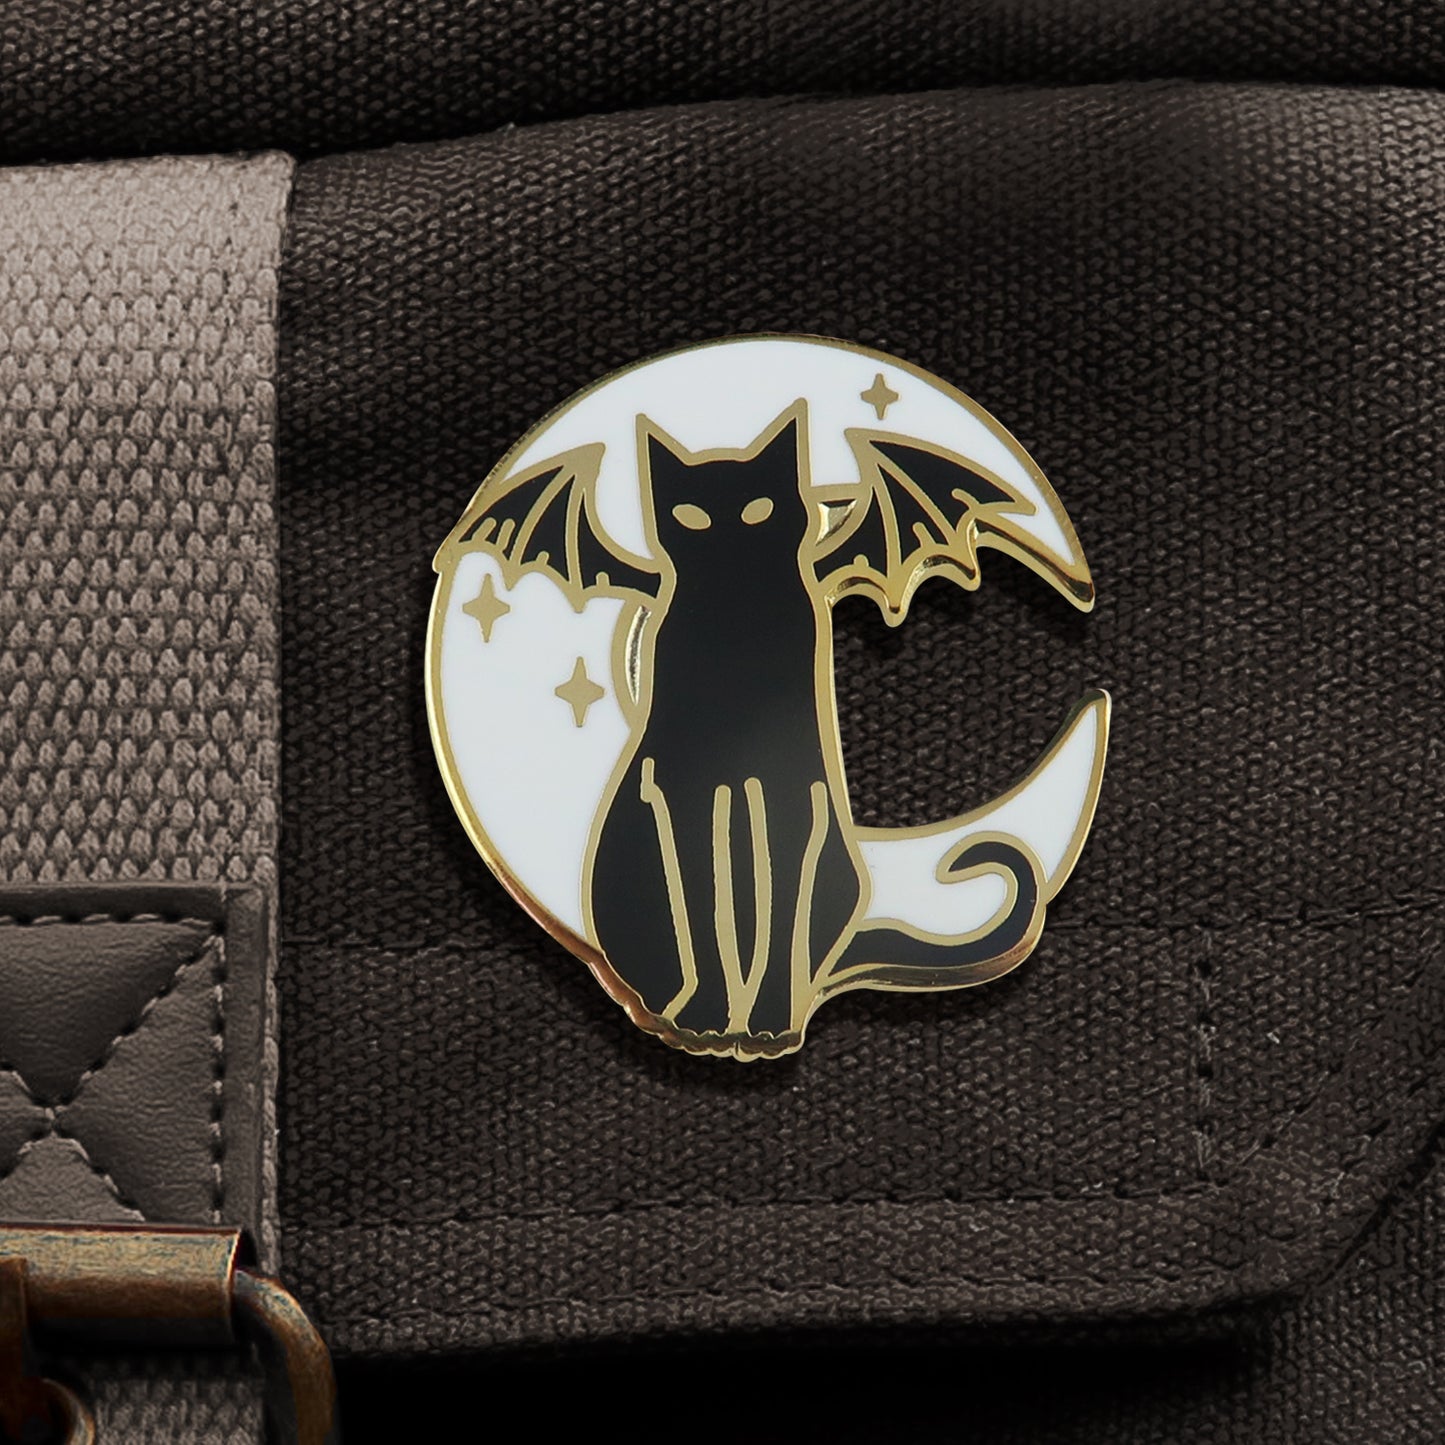 A black and white enamel pin with gold edges, attached to a black canvas bag. The pin depicts a black cat with bat wings, sitting upright. Behind the cat is a white crescent moon, with tiny gold stars scattered around it.